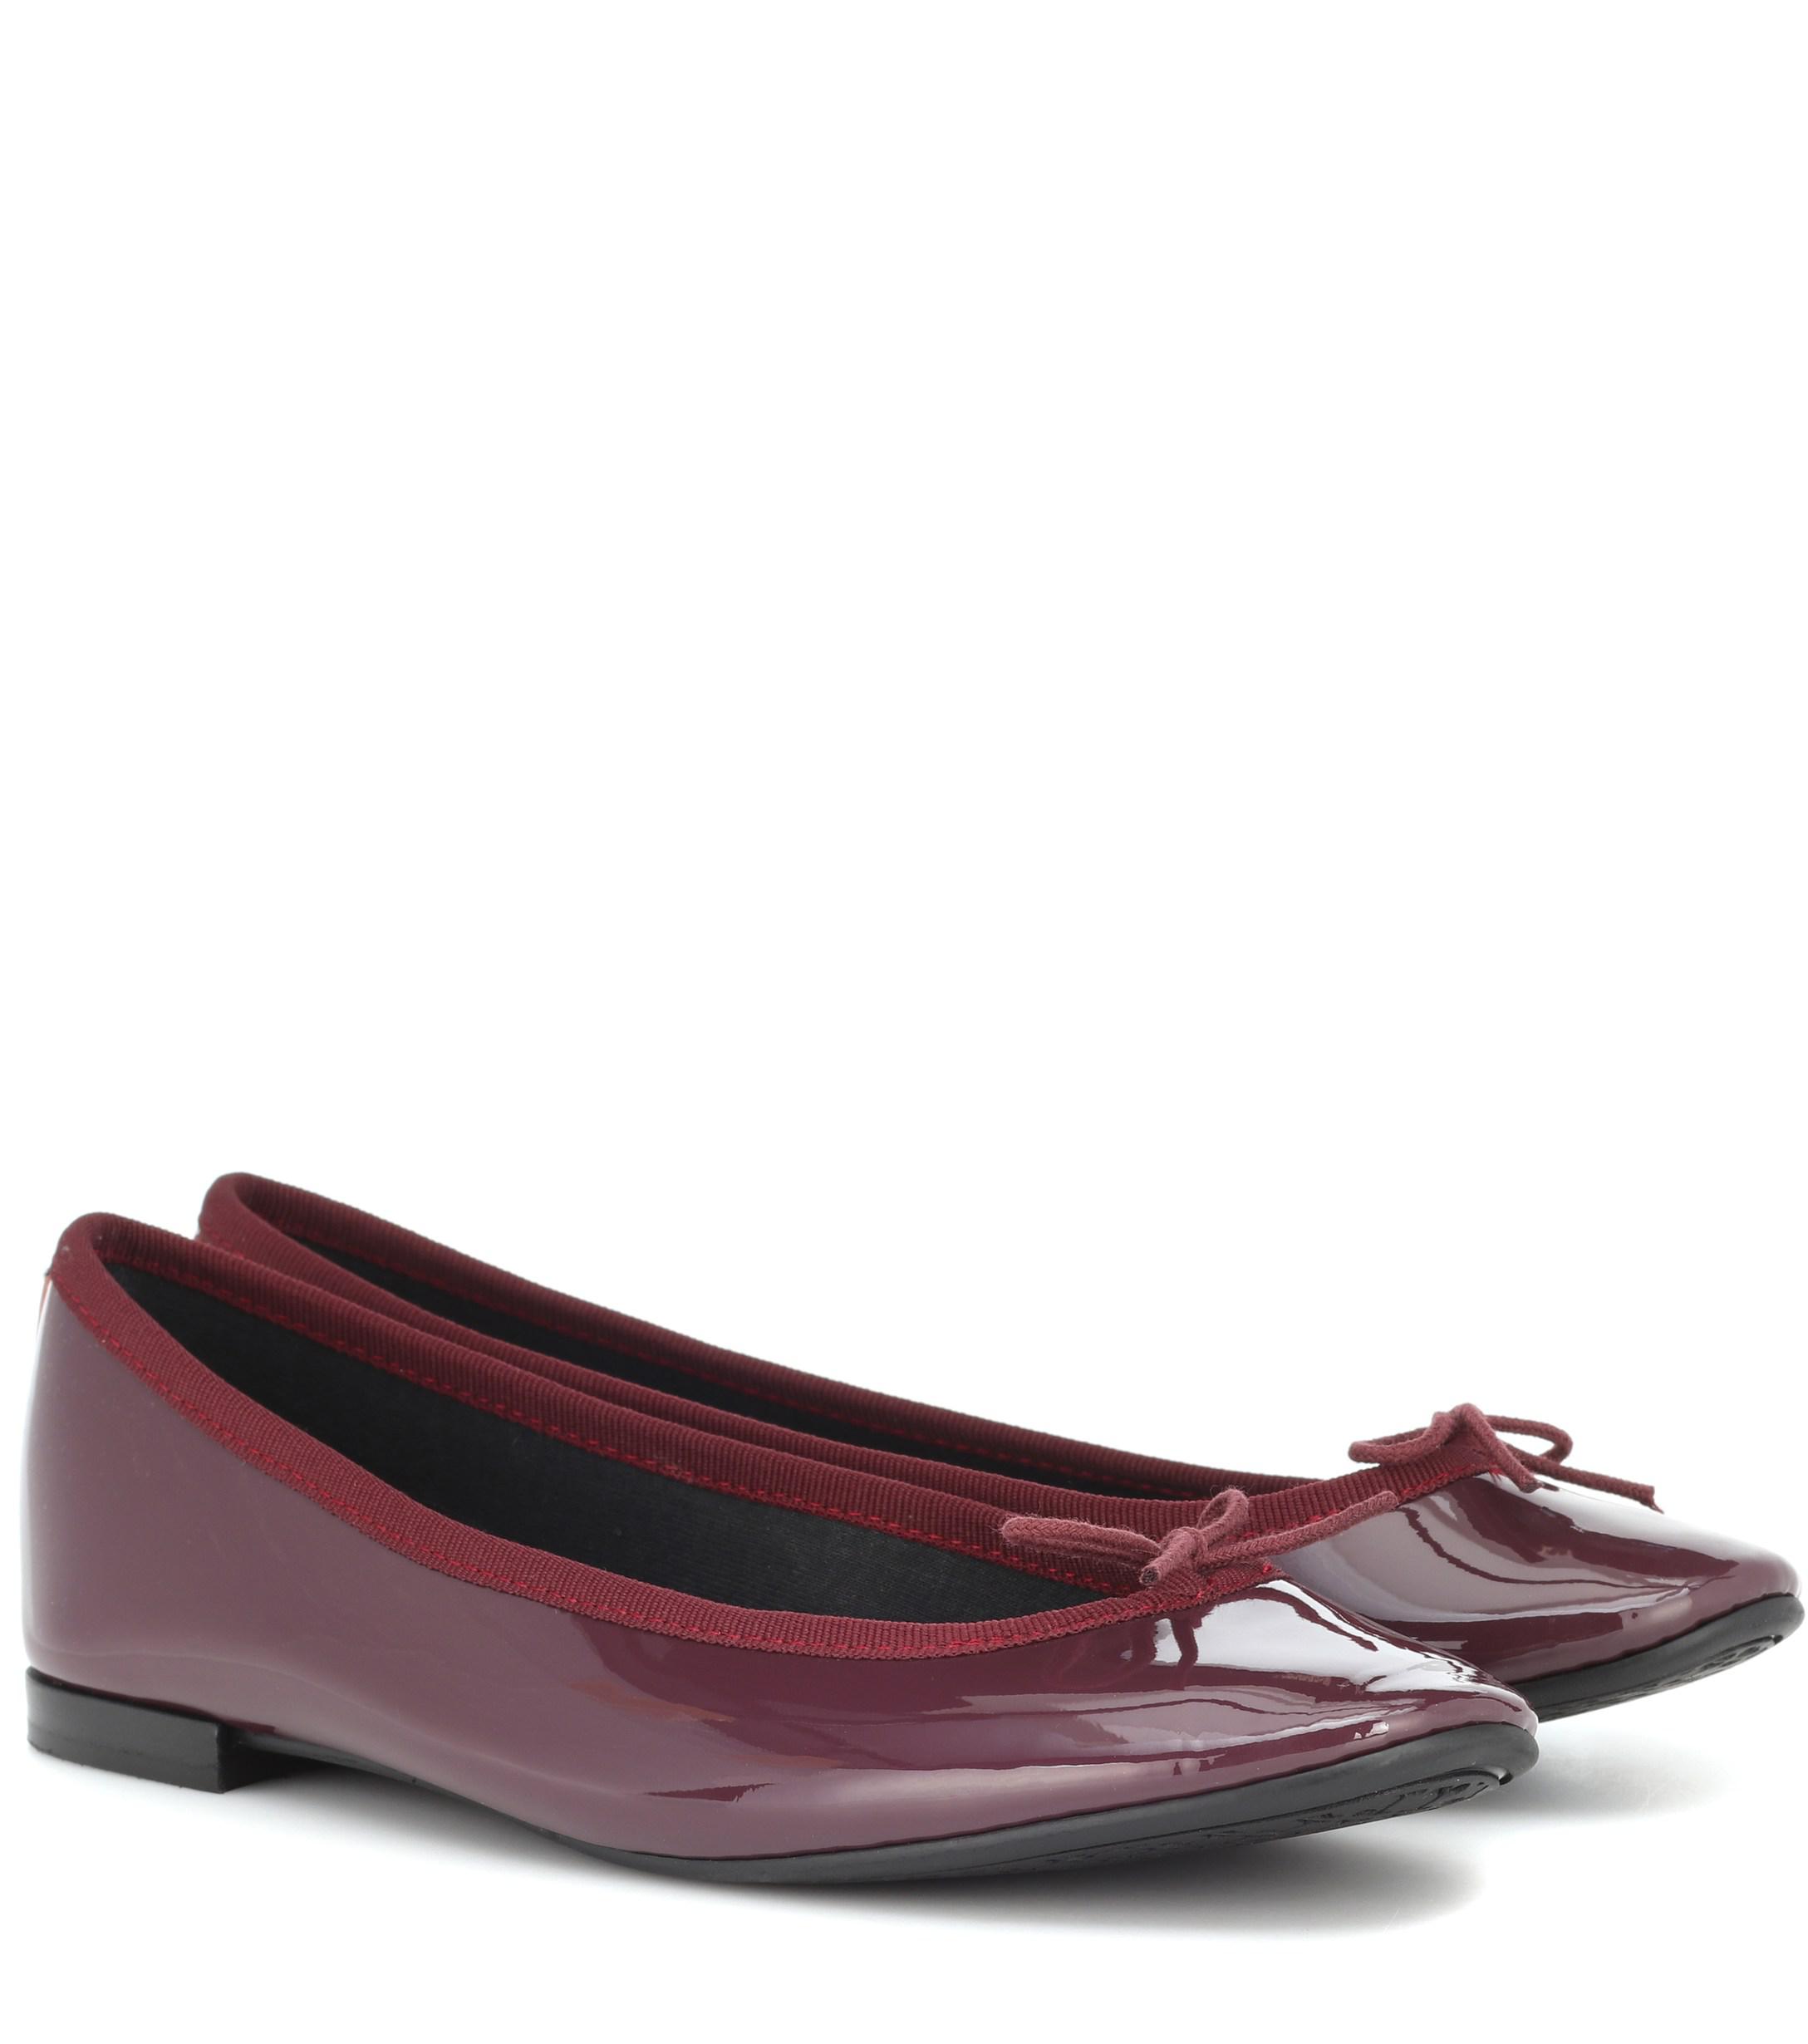 Repetto Lili Patent Leather Ballet Flats - Lyst